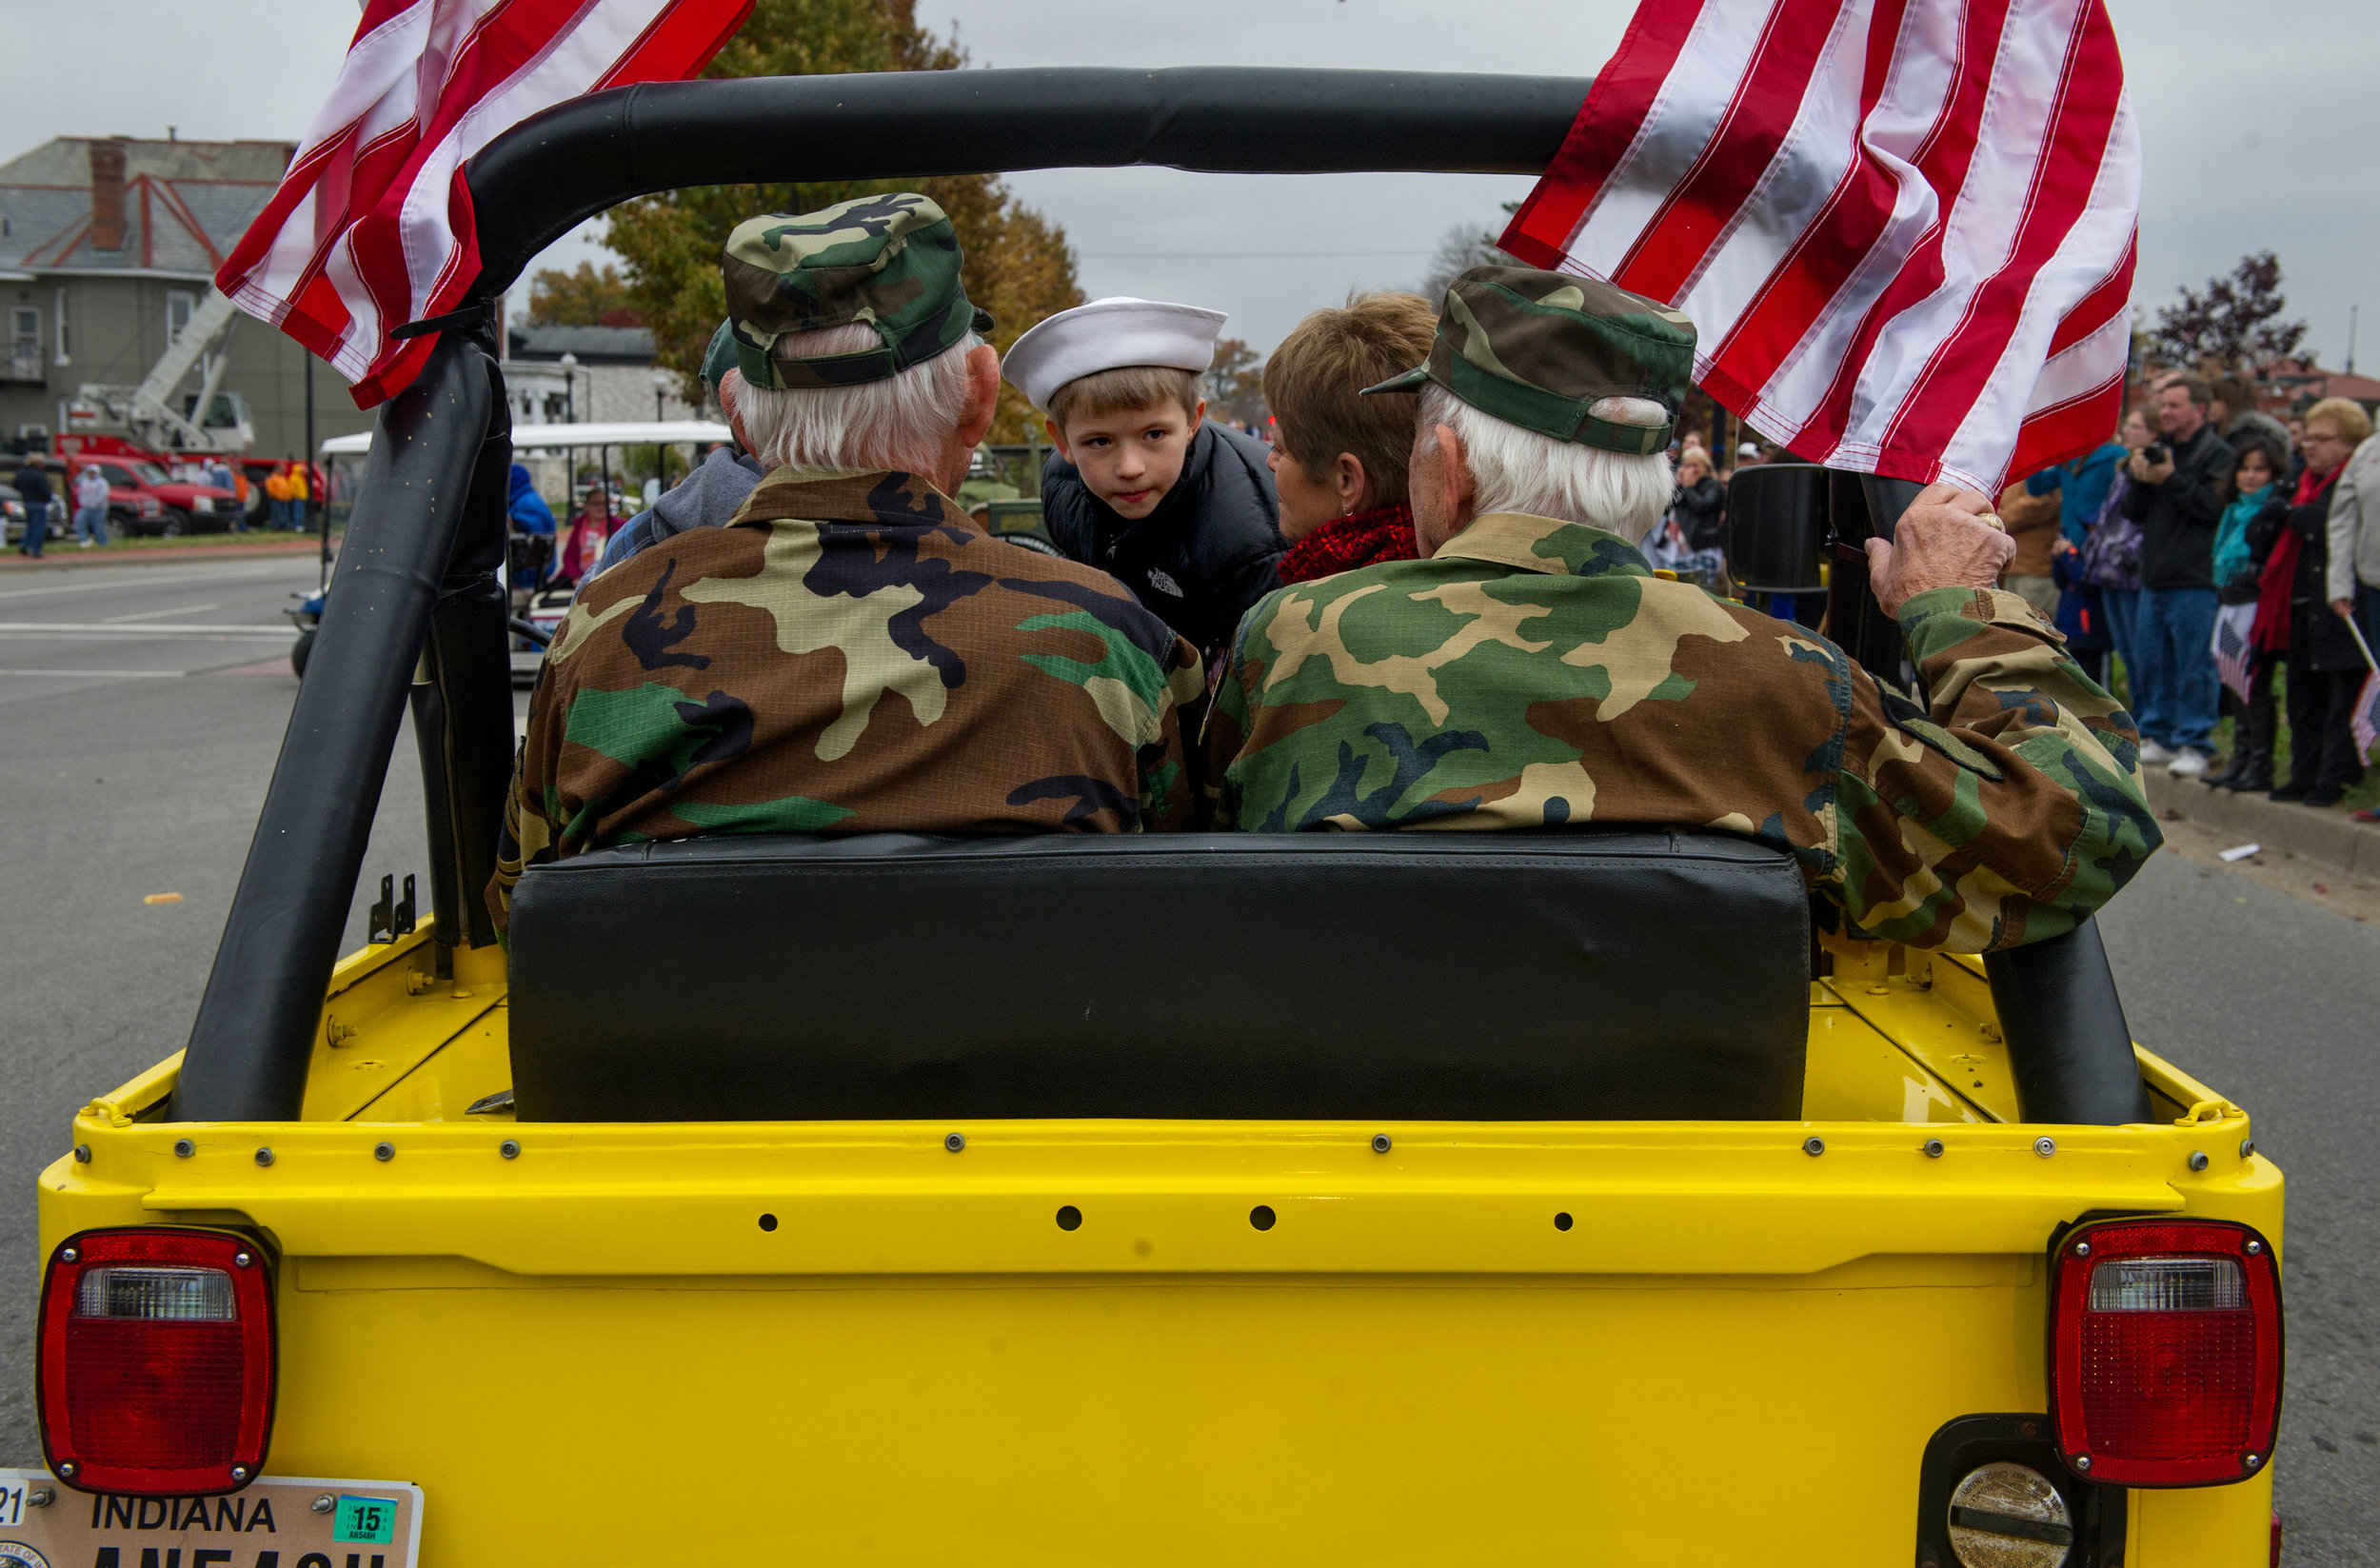  World War II Army veterans and brothers Dwayne Hume (left) and Donald Hume (right) ride with Joey Langerak, 7, of Evansville in a 1978 Jeep during the Veterans' Day Parade in on Riverside Drive in Evansville Saturday, Nov. 8, 2014. 